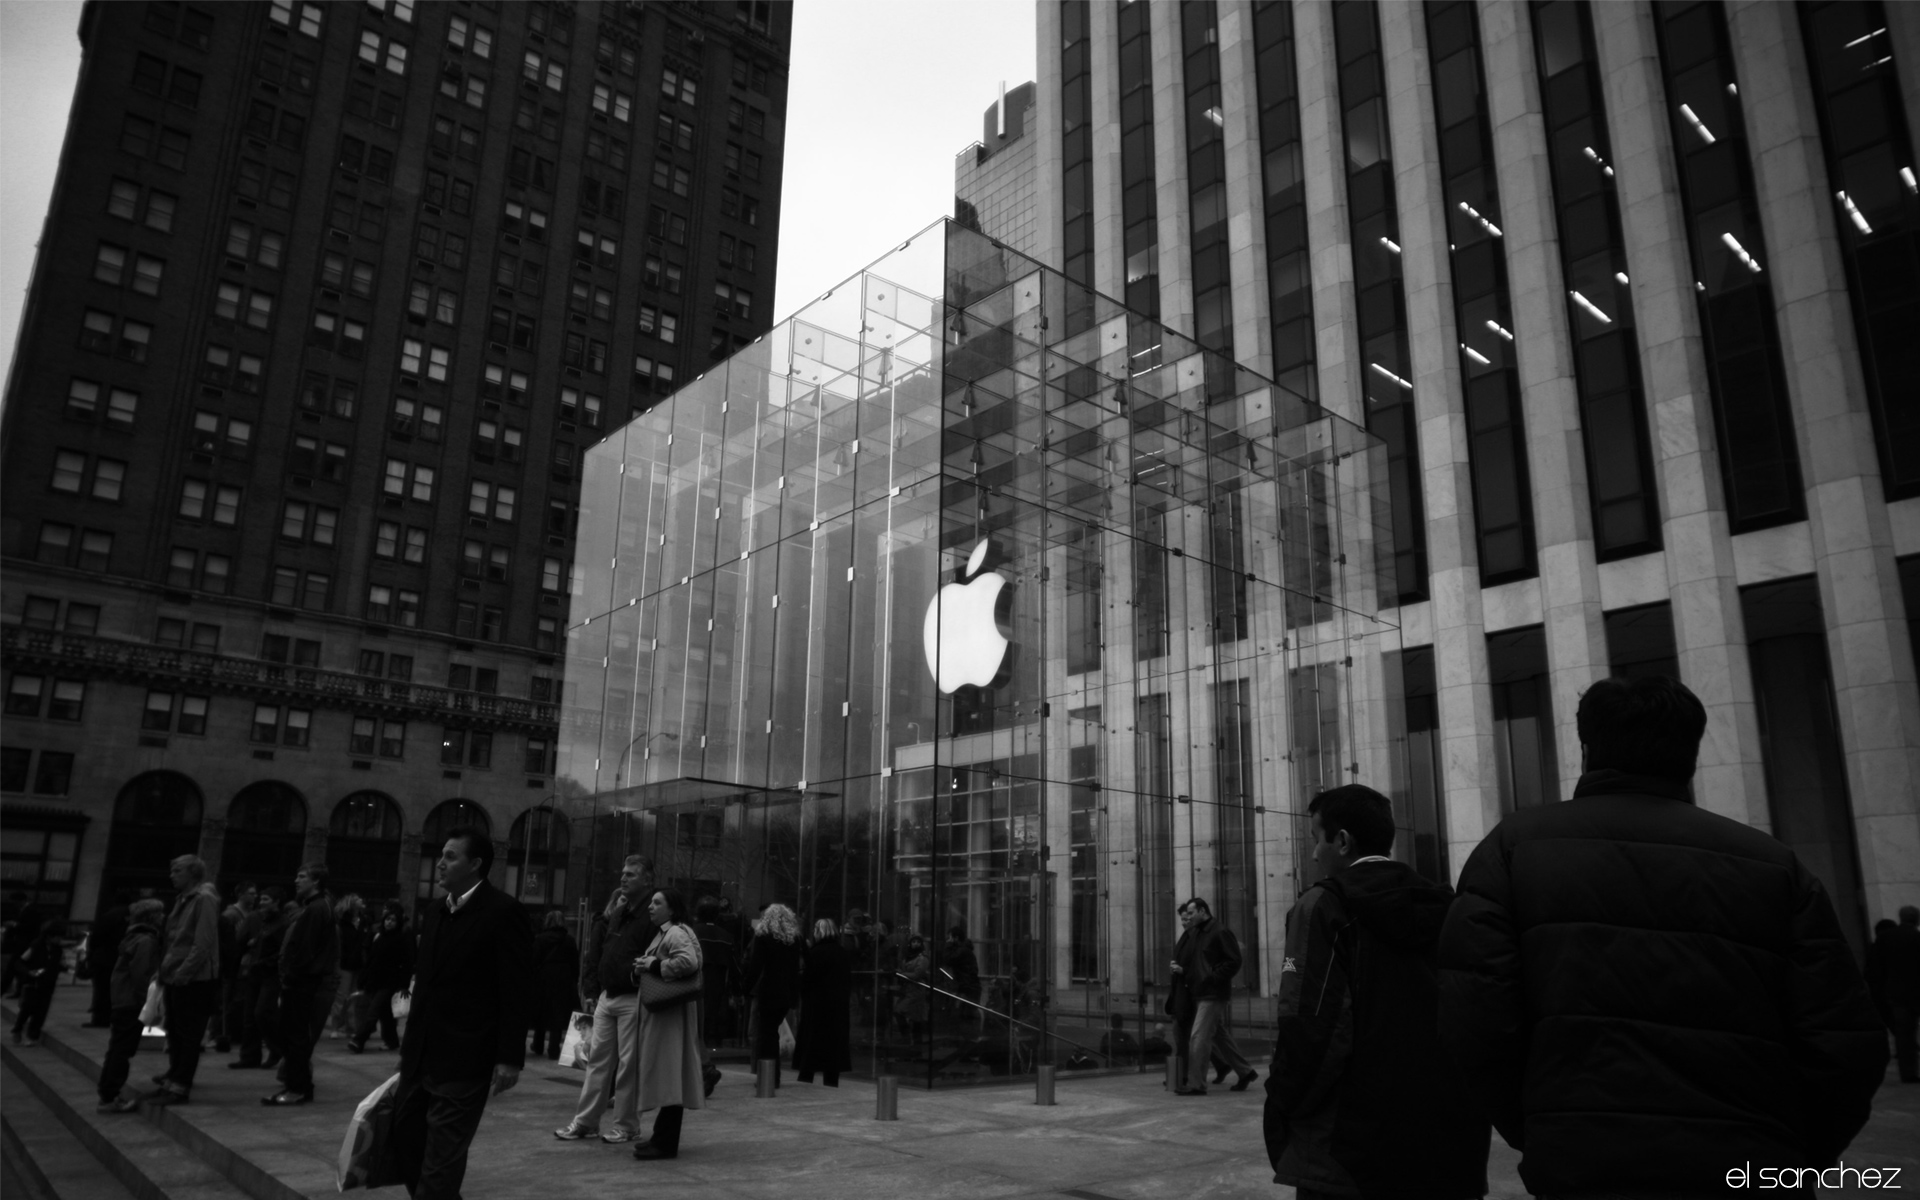 Free Download Apple Store Fifth Avenue Mac 19x10 For Your Desktop Mobile Tablet Explore 46 The Wallpaper Store Wallpaper Stores Near Me Wallpaper For Walls Sherwin Williams The Wallpaper